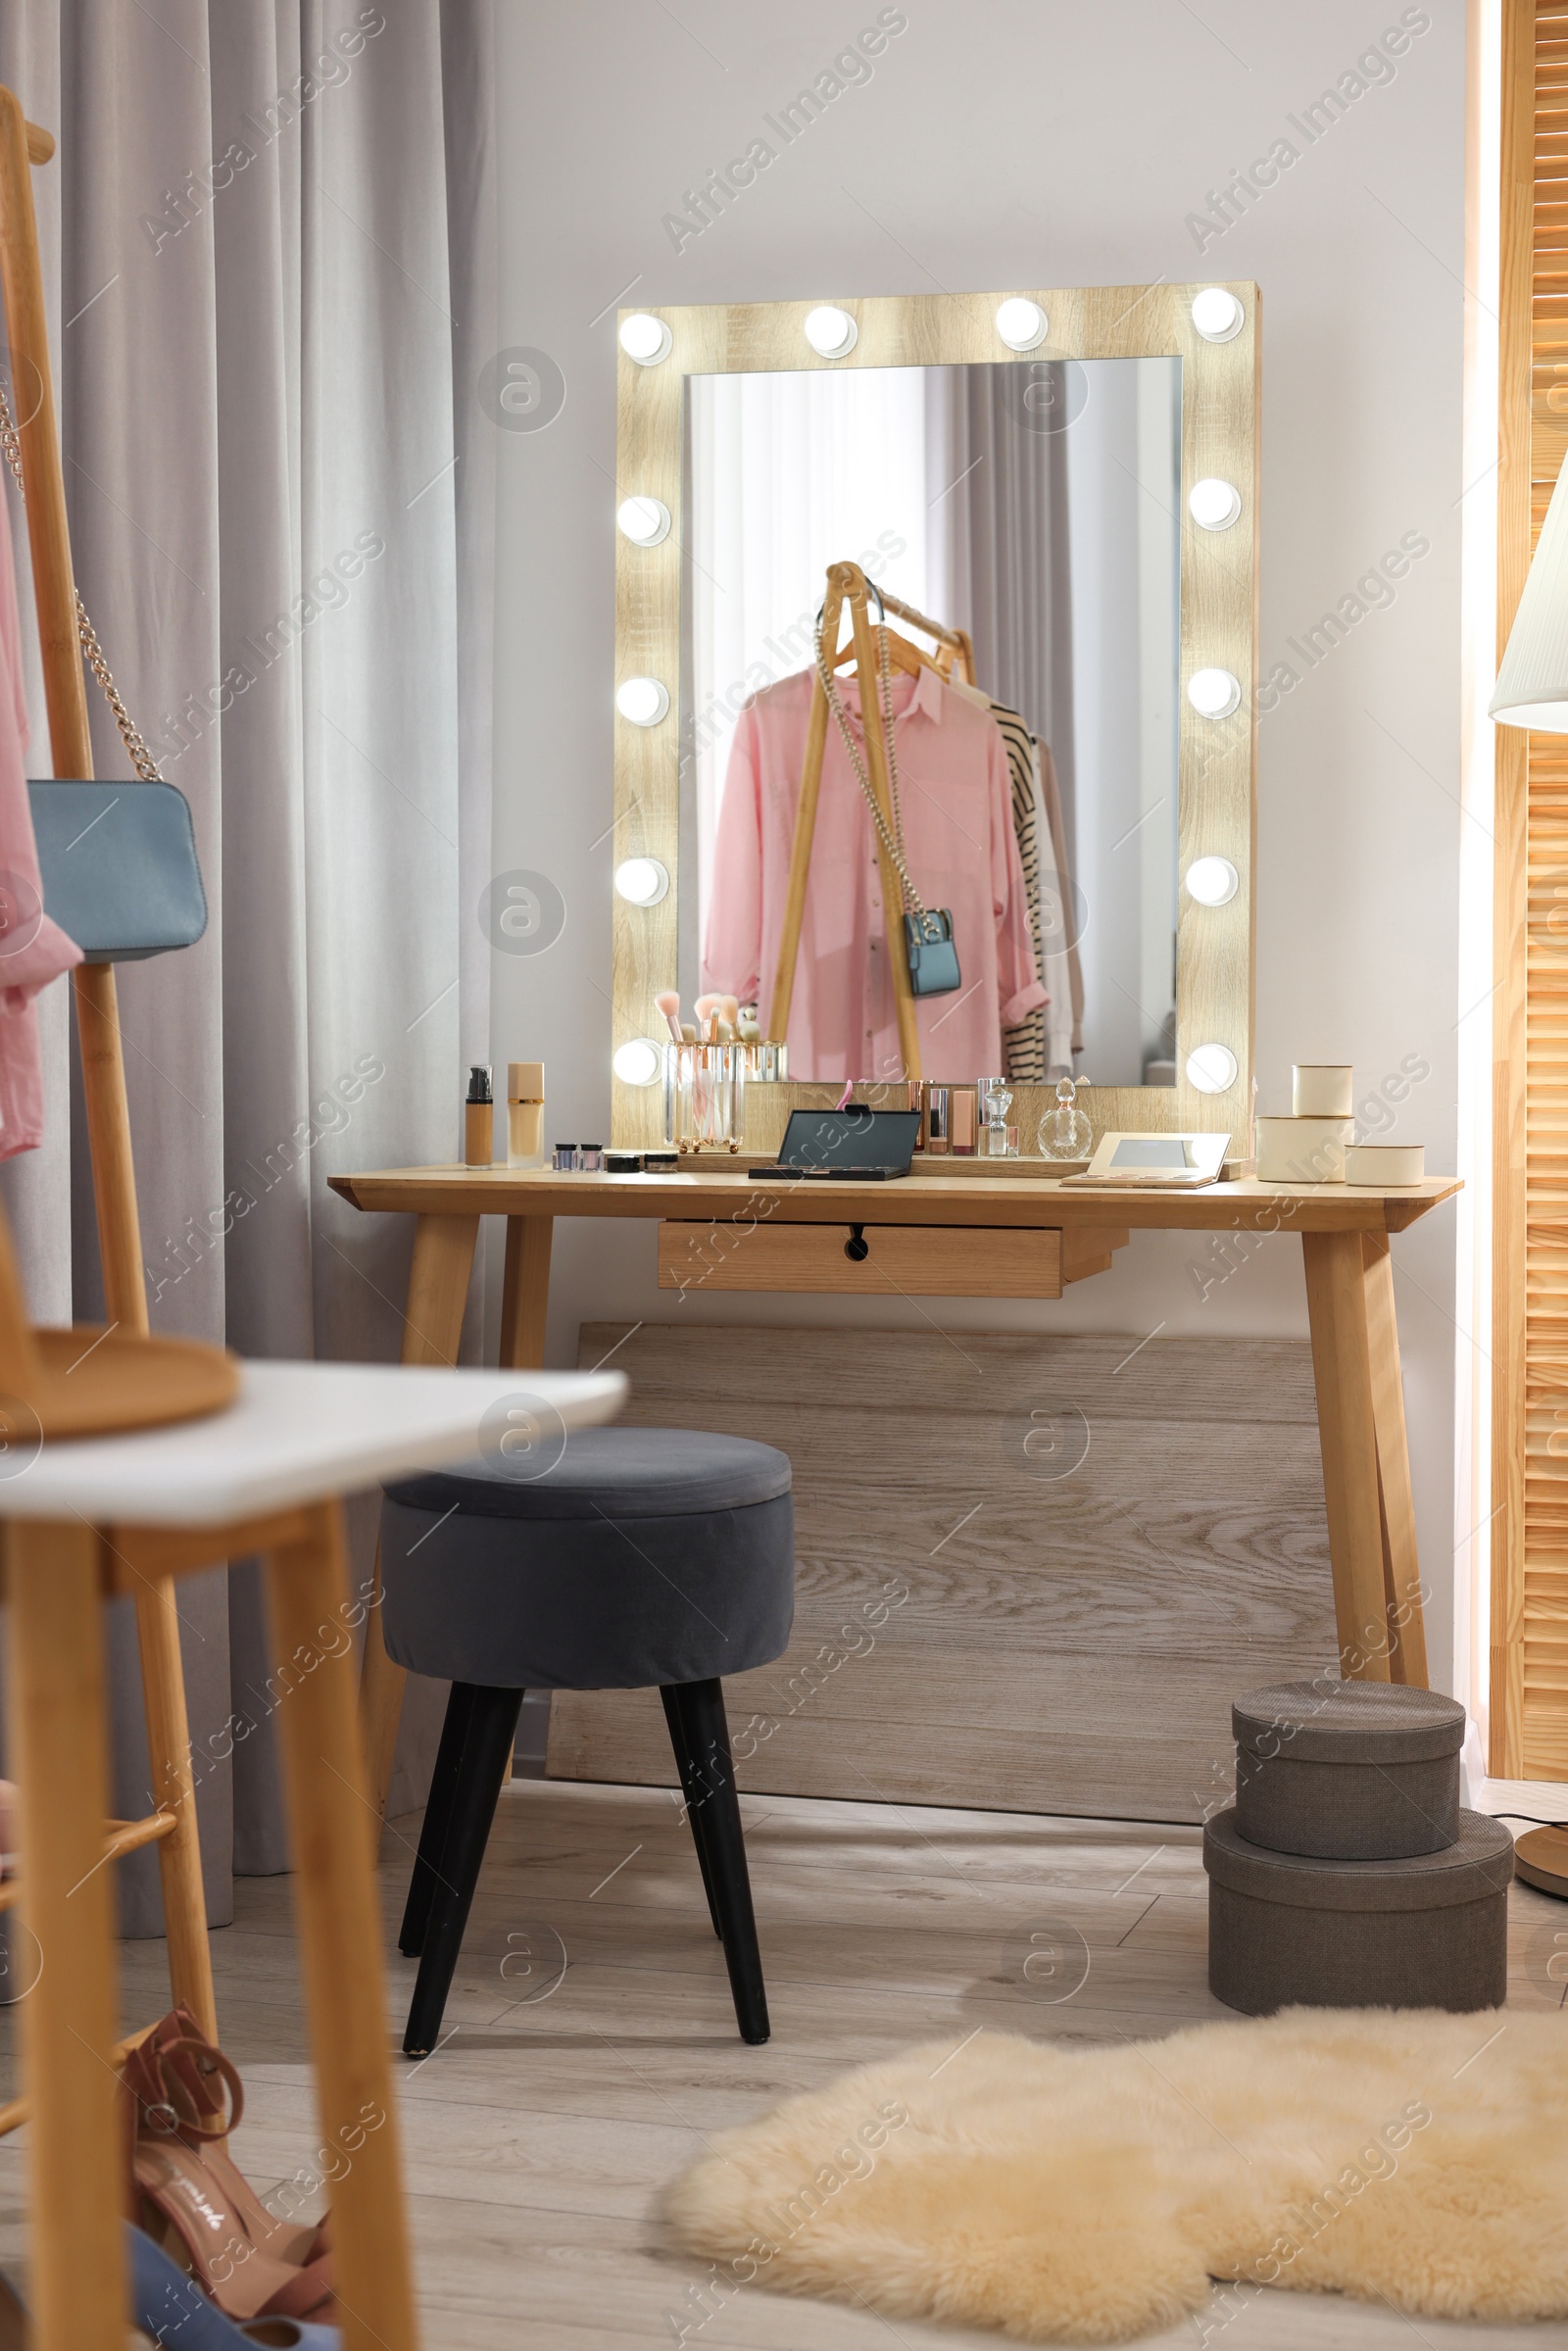 Photo of Makeup room. Stylish wooden dressing table with mirror and chair indoors